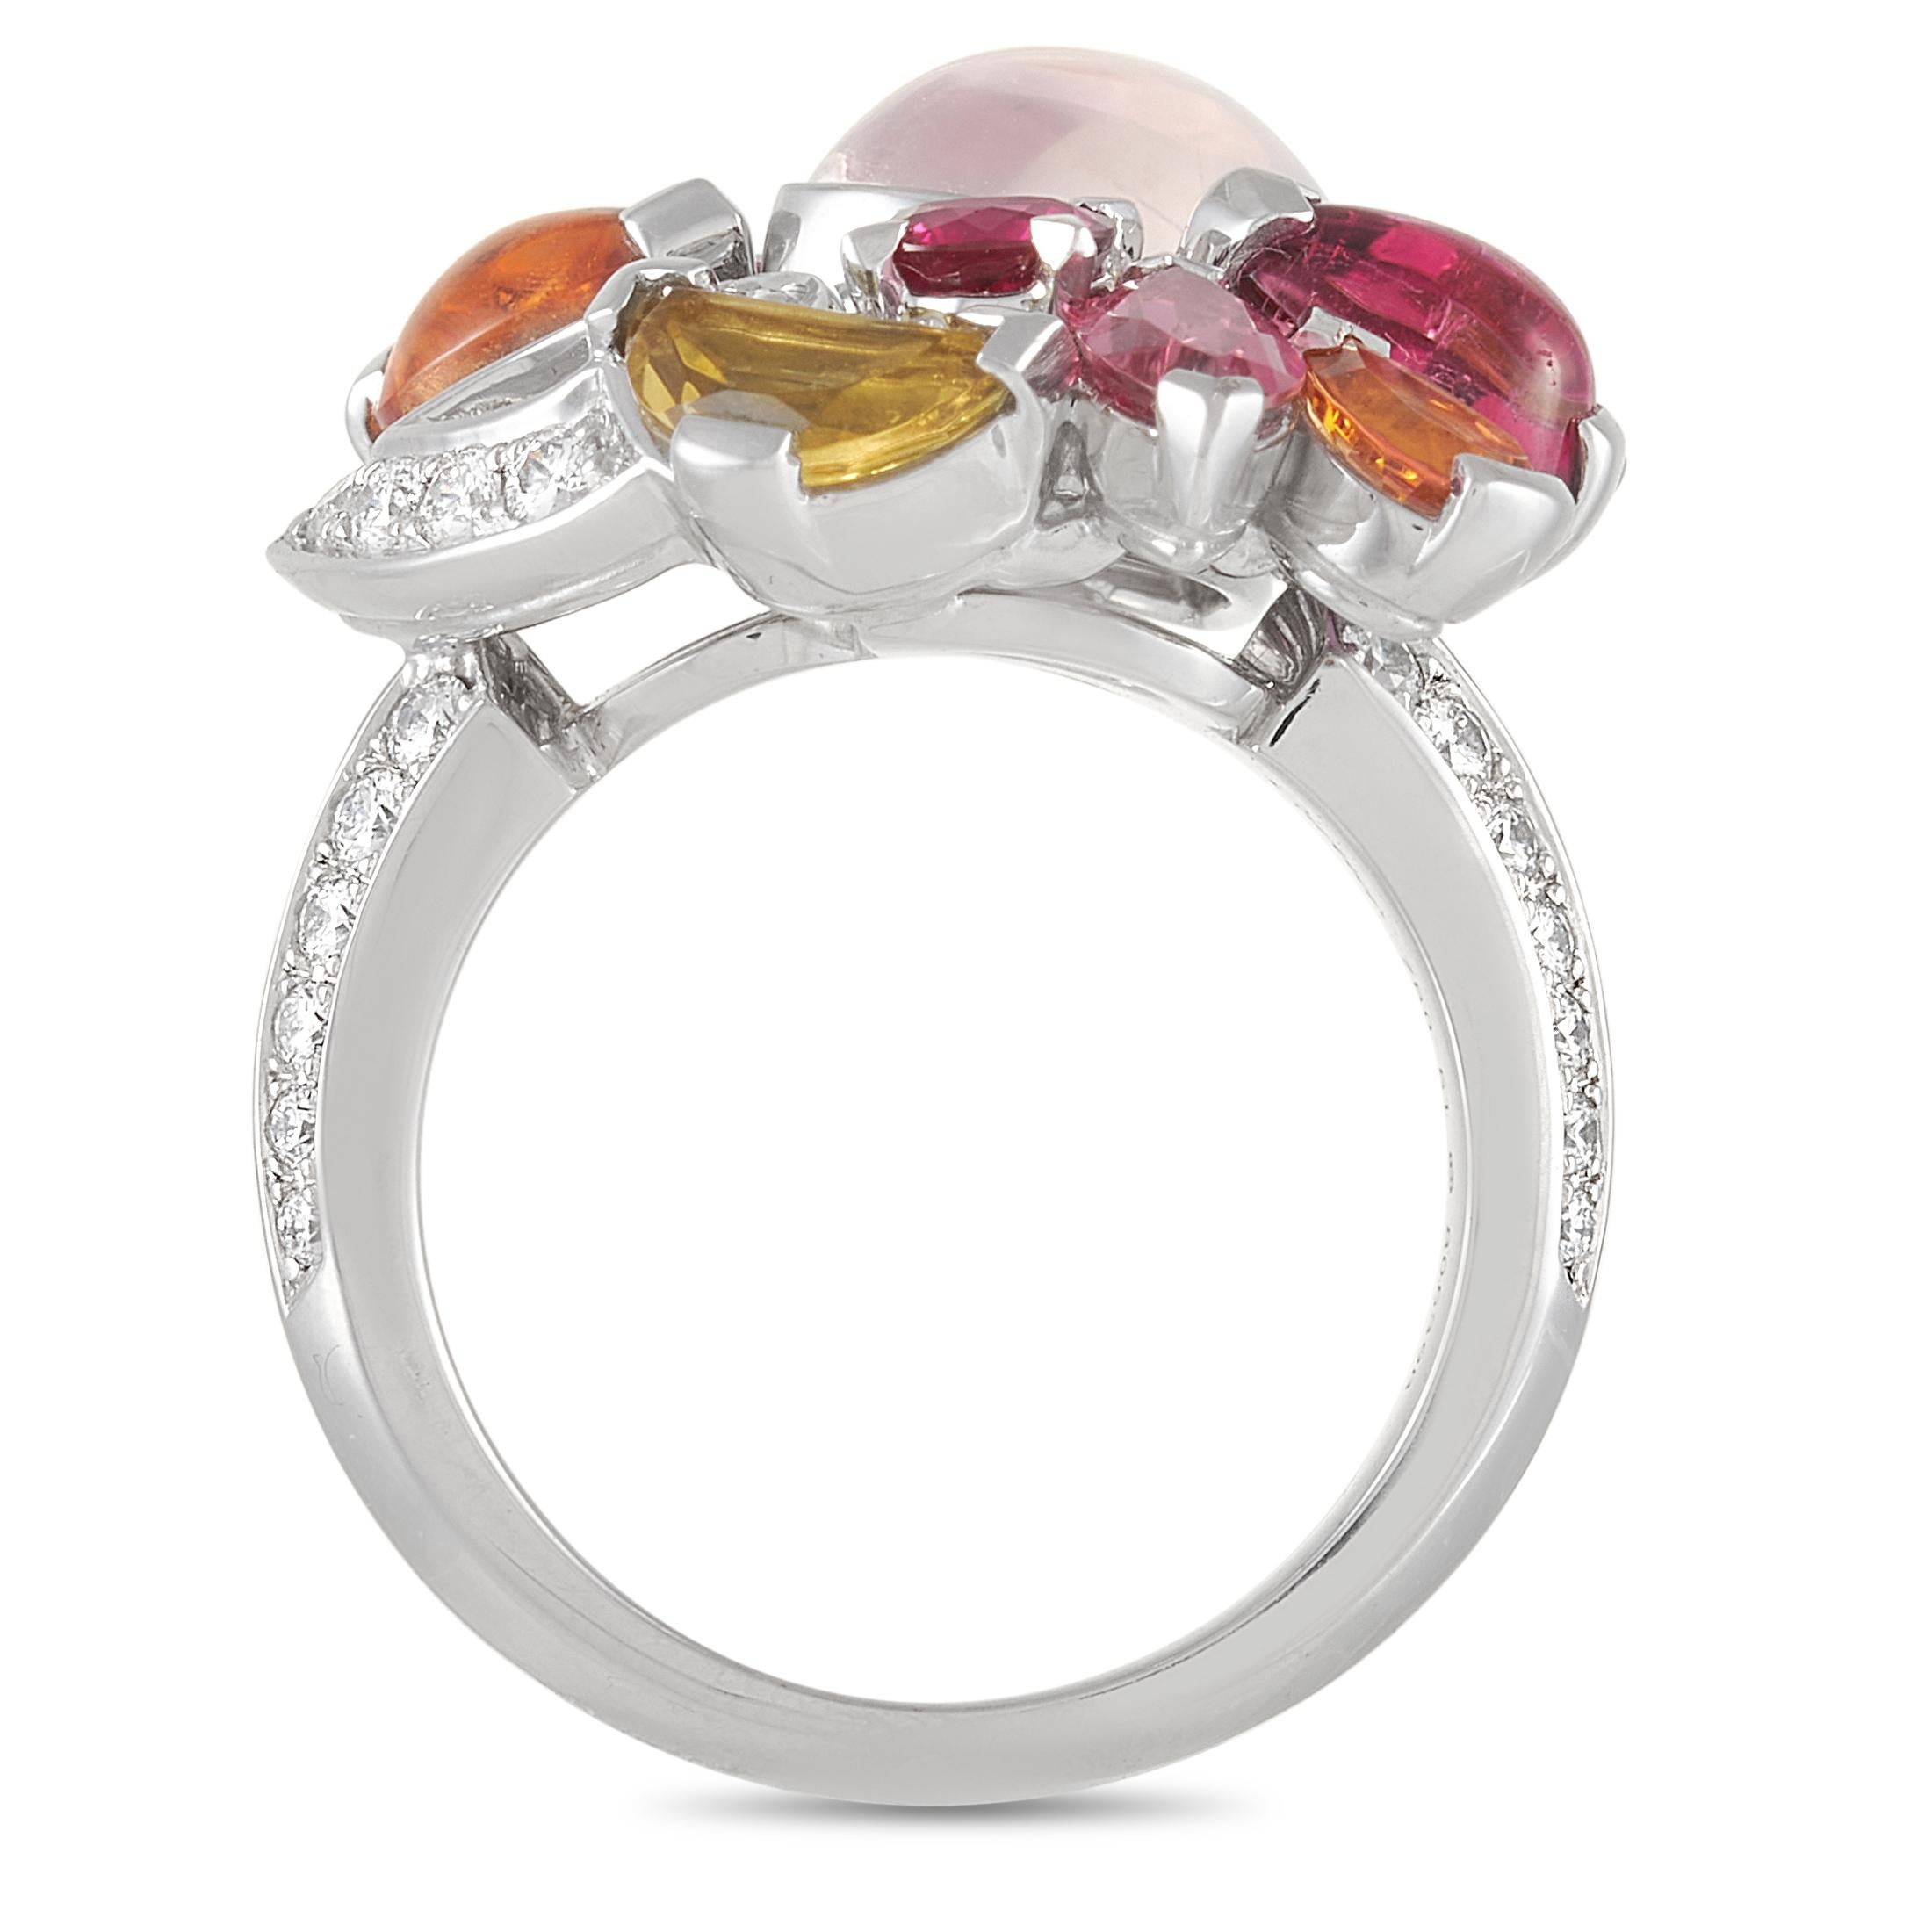 Captivating colors and textures come together to create this stylish, unique Cartier Sorbet Ring. Made with a 18K White Gold setting, this elegant design features a delicate 3mm band and an impressive 8mm top height. A breathtaking Rose Quartz